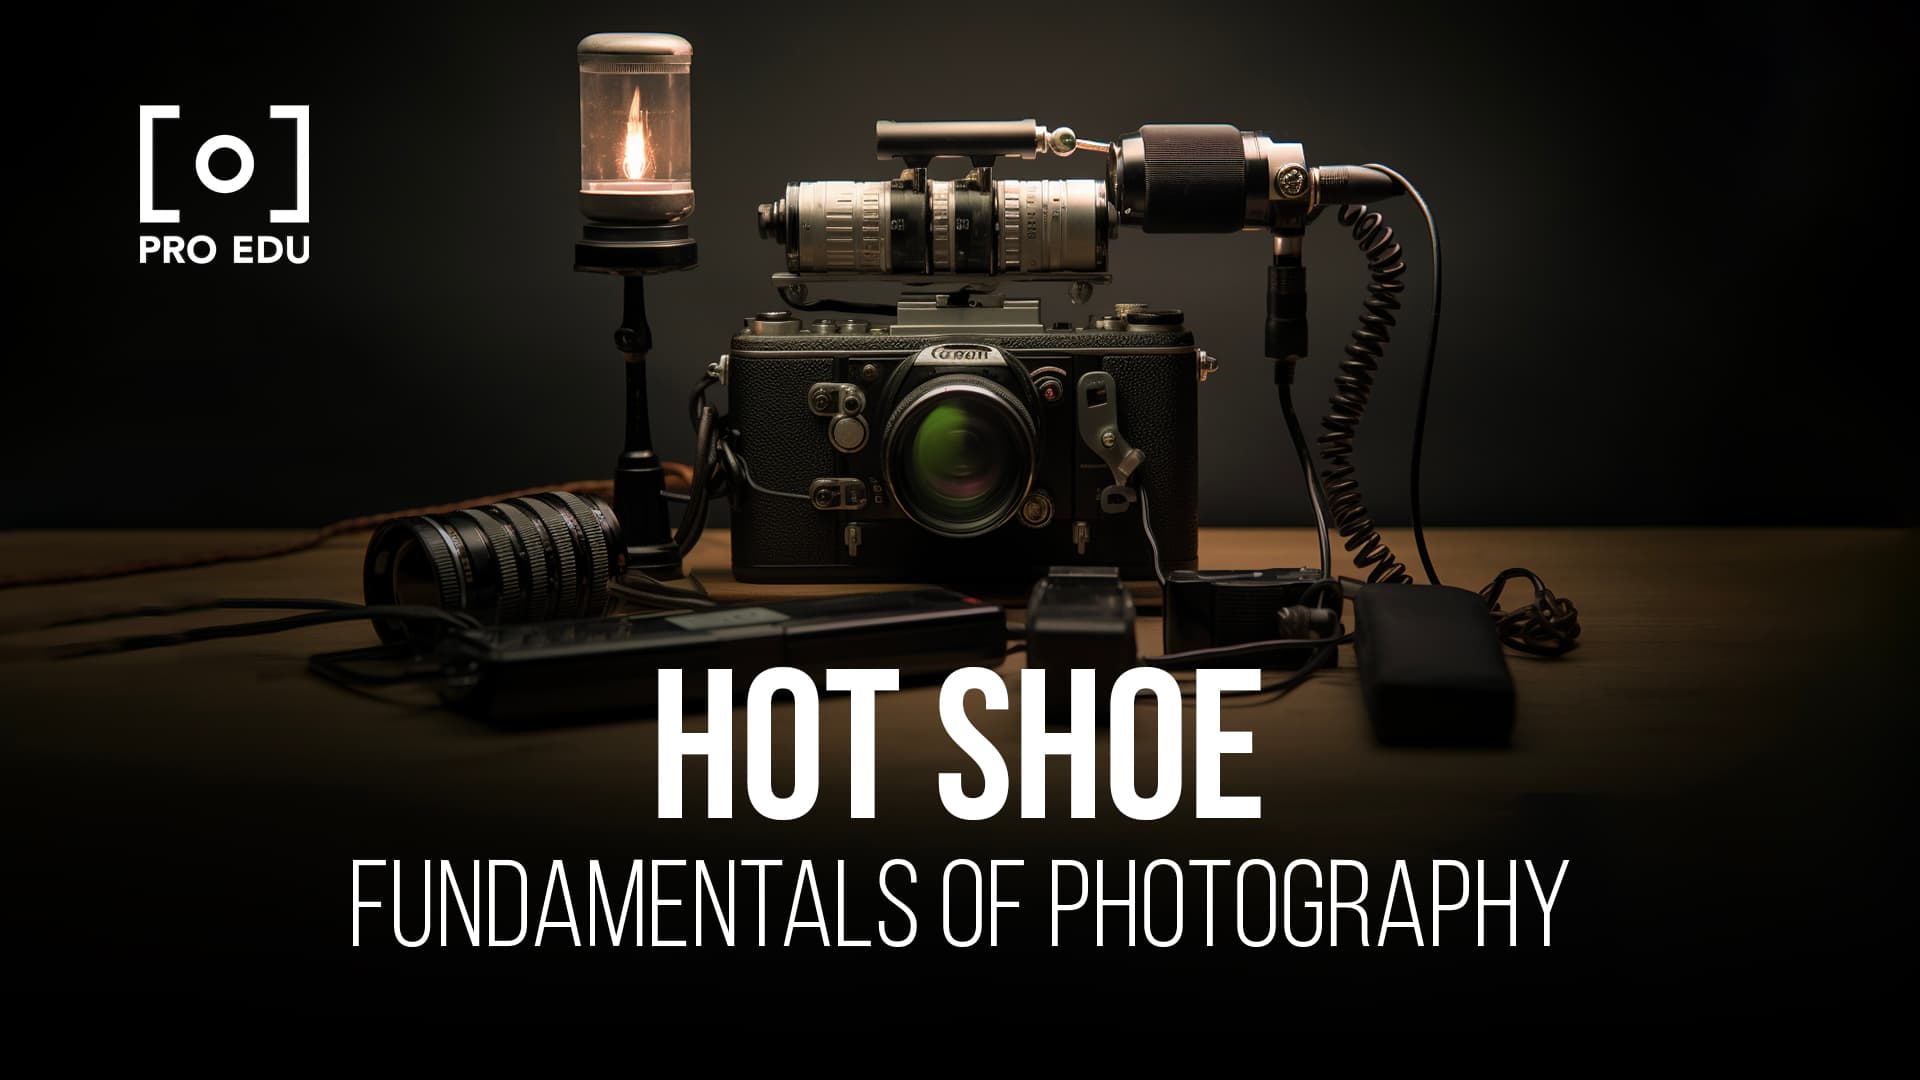 Exploring the multifunctional use of the hot shoe in photography beyond flash mounting